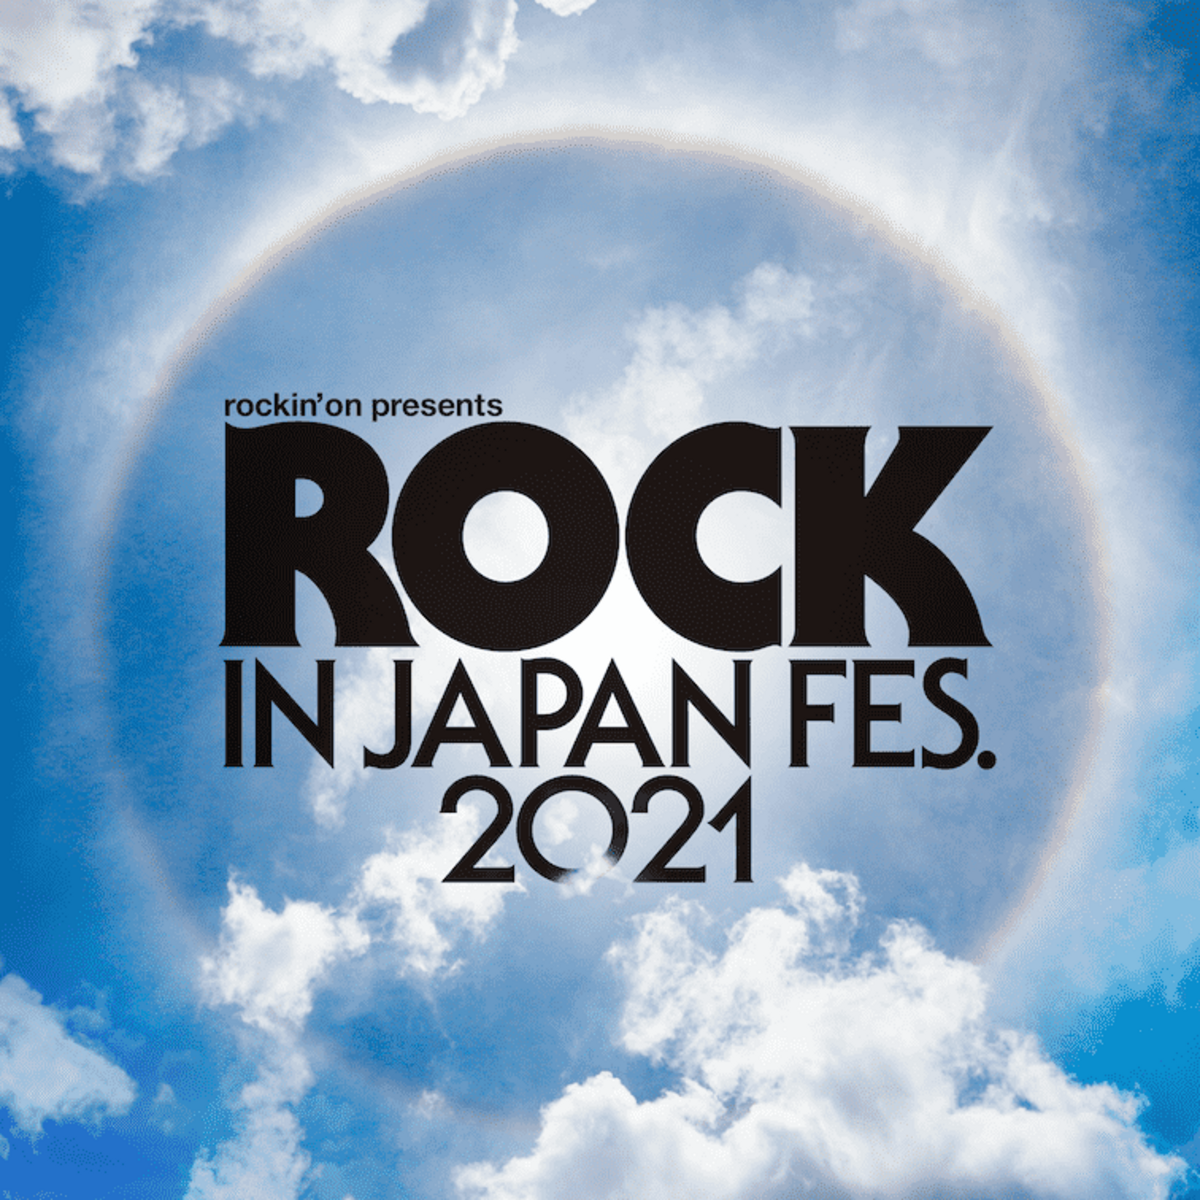 Rock In Japan Festival 21 第1弾出演アーティストでマキシマム ザ ホルモン Uverworld Man With A Mission Wanimaら発表 激ロック ニュース